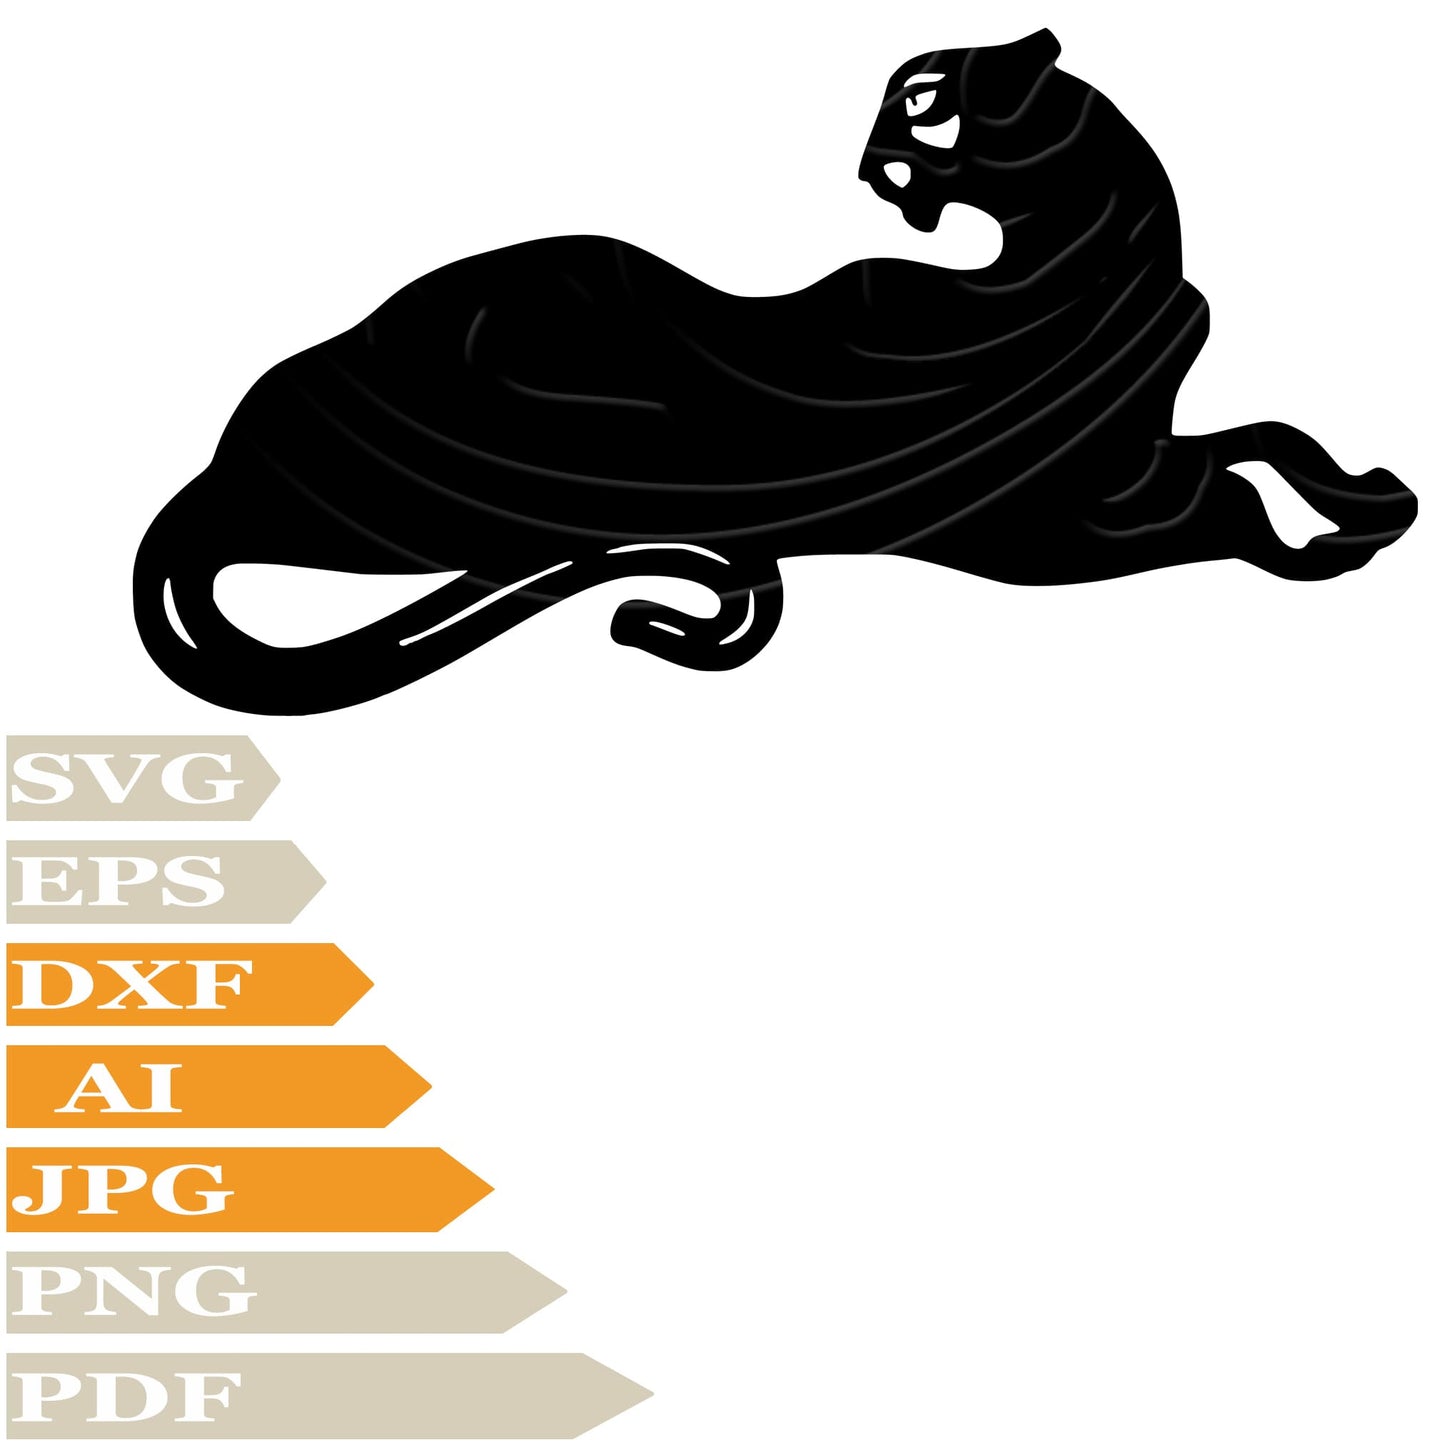 Panther-Wild Panther SVG File-Black Panther SVG Design-Black Panther Vector Graphics-PNG-For Cricut-Clip Art-Image Cut-T-Shirt-Wall Sticker-Tattoo-Silhouette